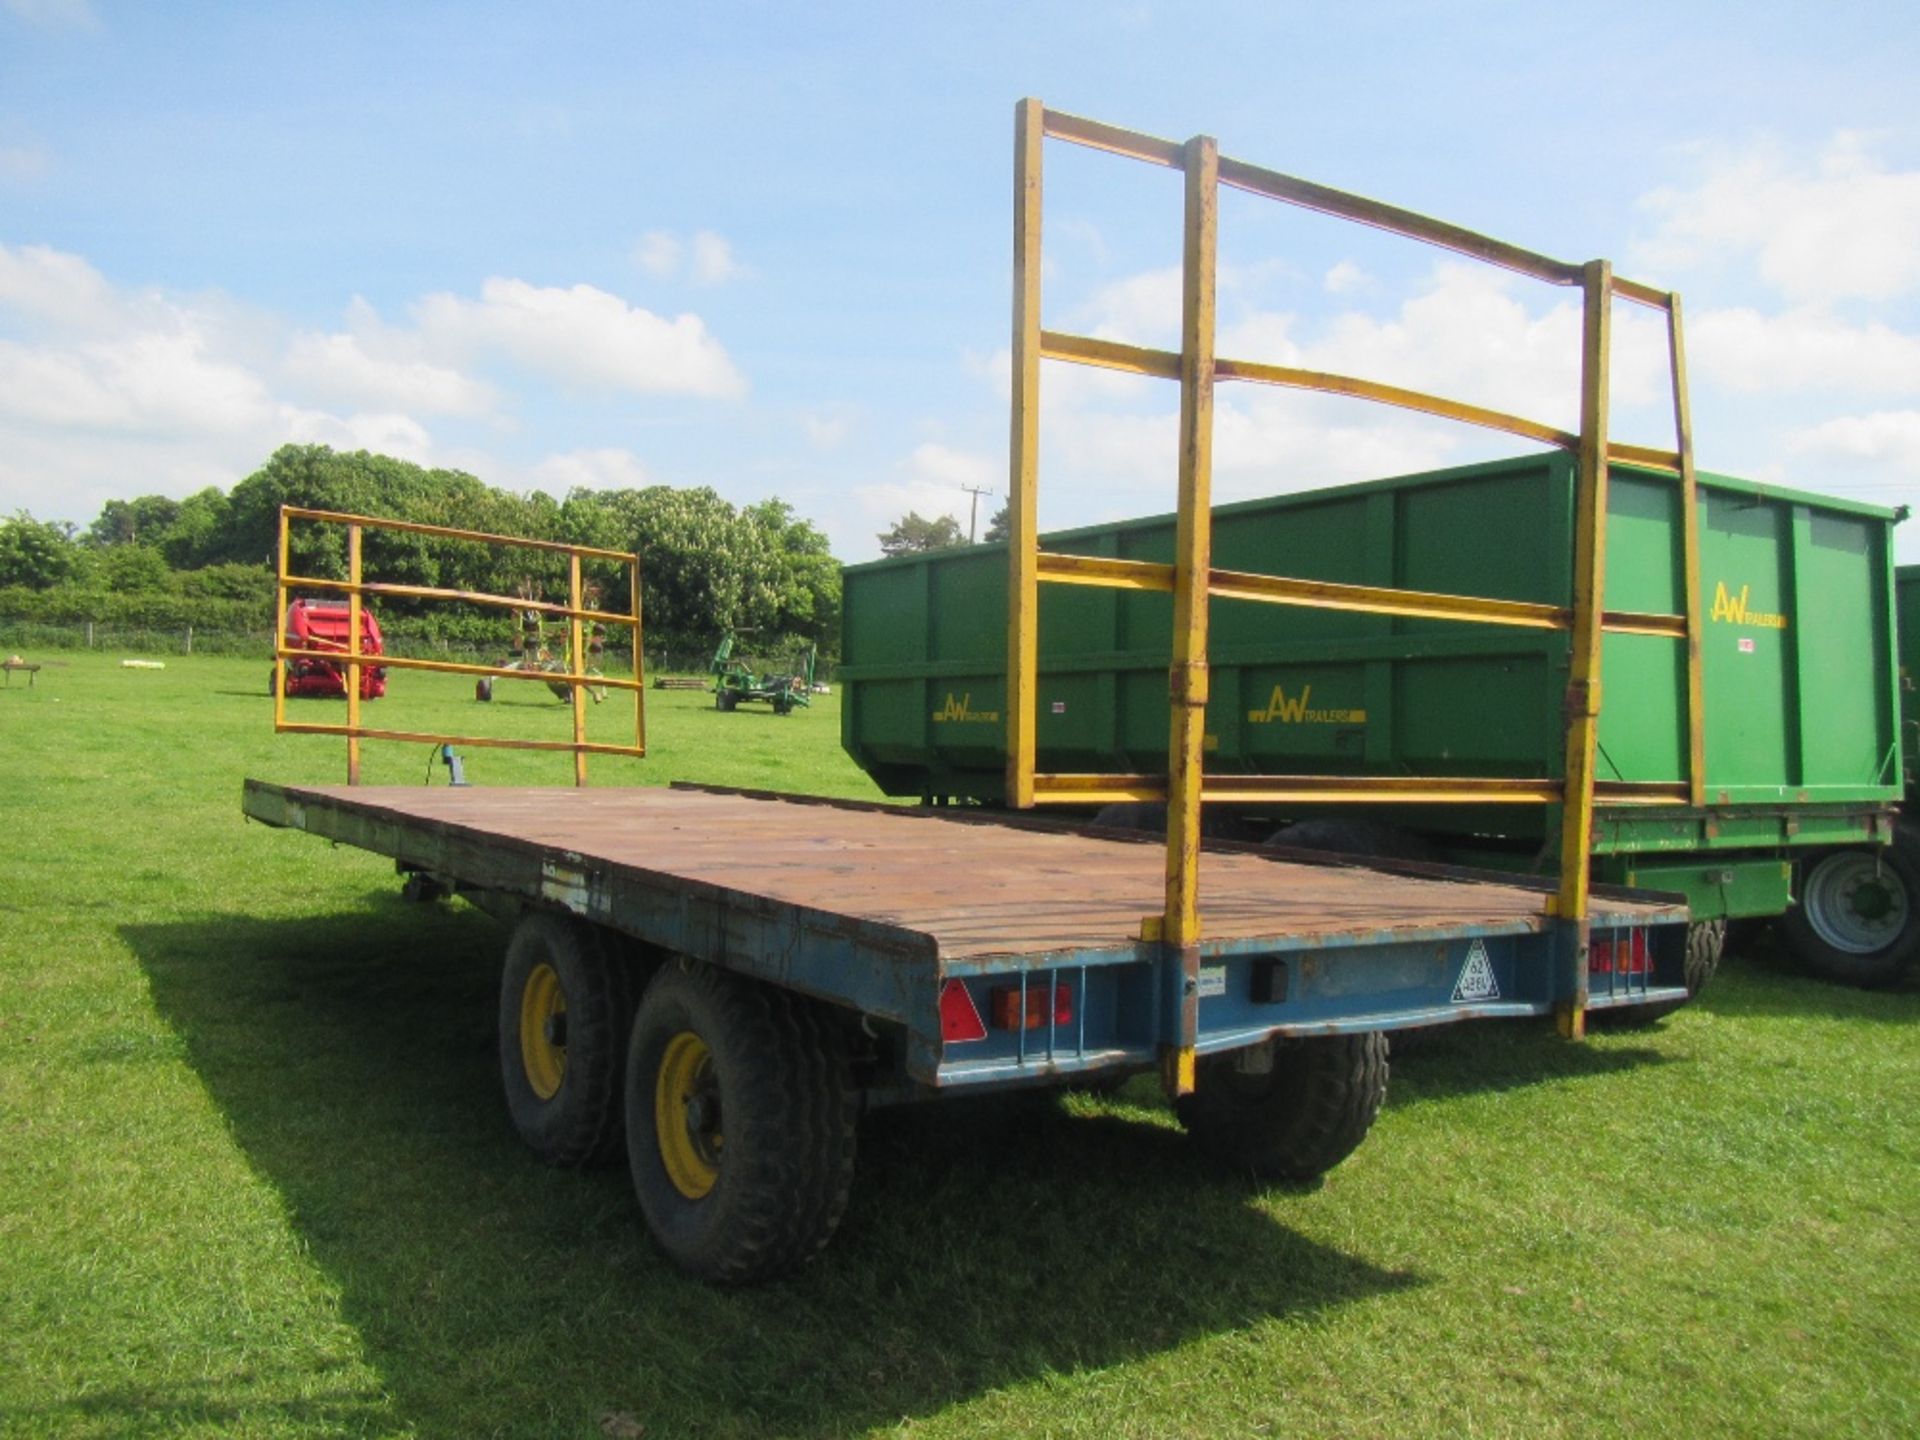 1995 12tonne tandem axle 21ft steel flat bed trailer Serial No. 1095MAY501 - Image 3 of 5